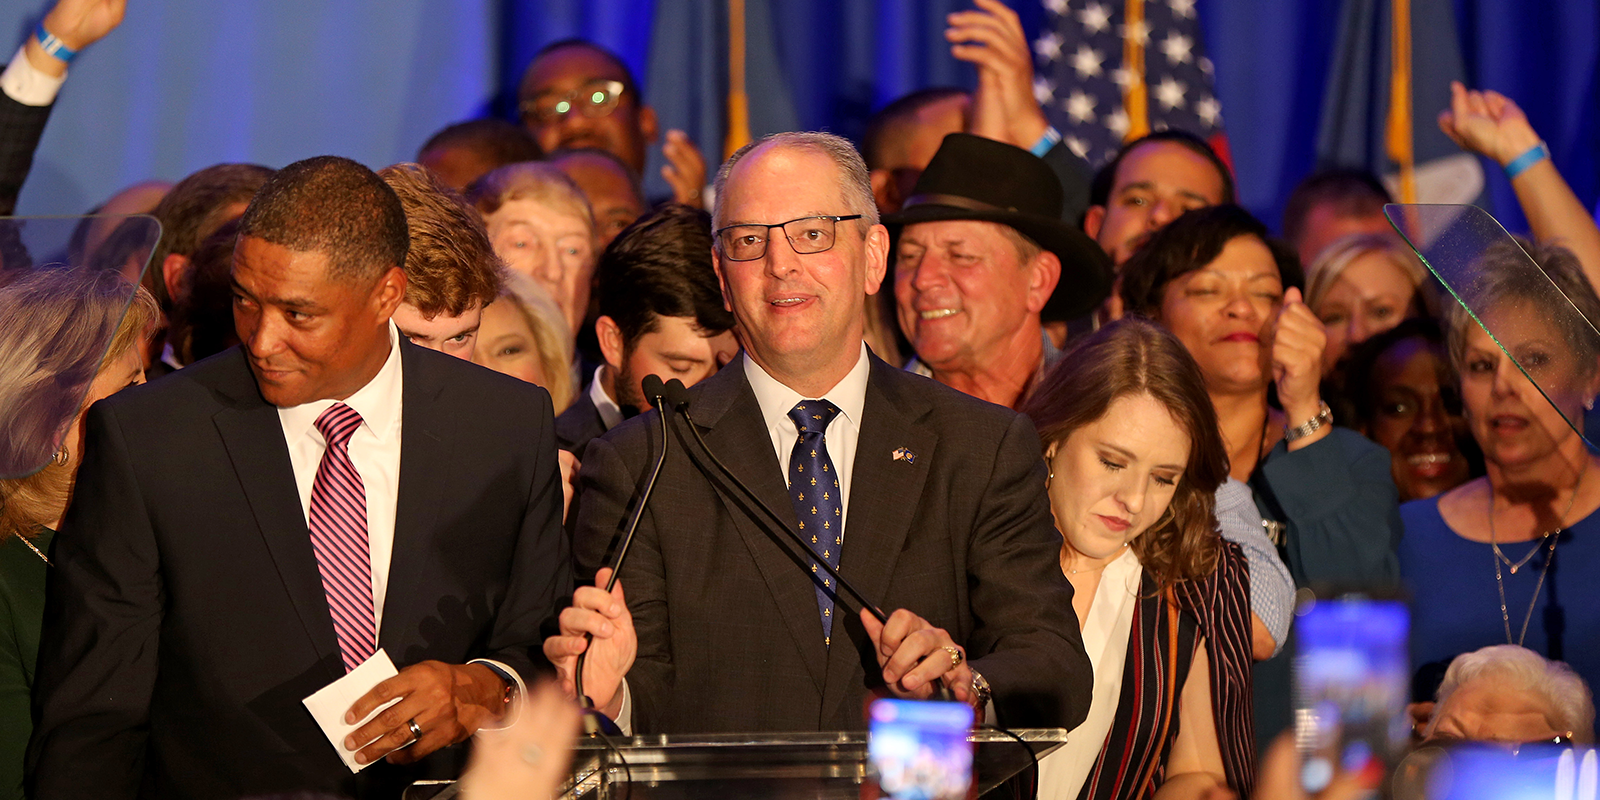 Louisiana Governor Wins Reelection as Working Families Make Their Voices Heard